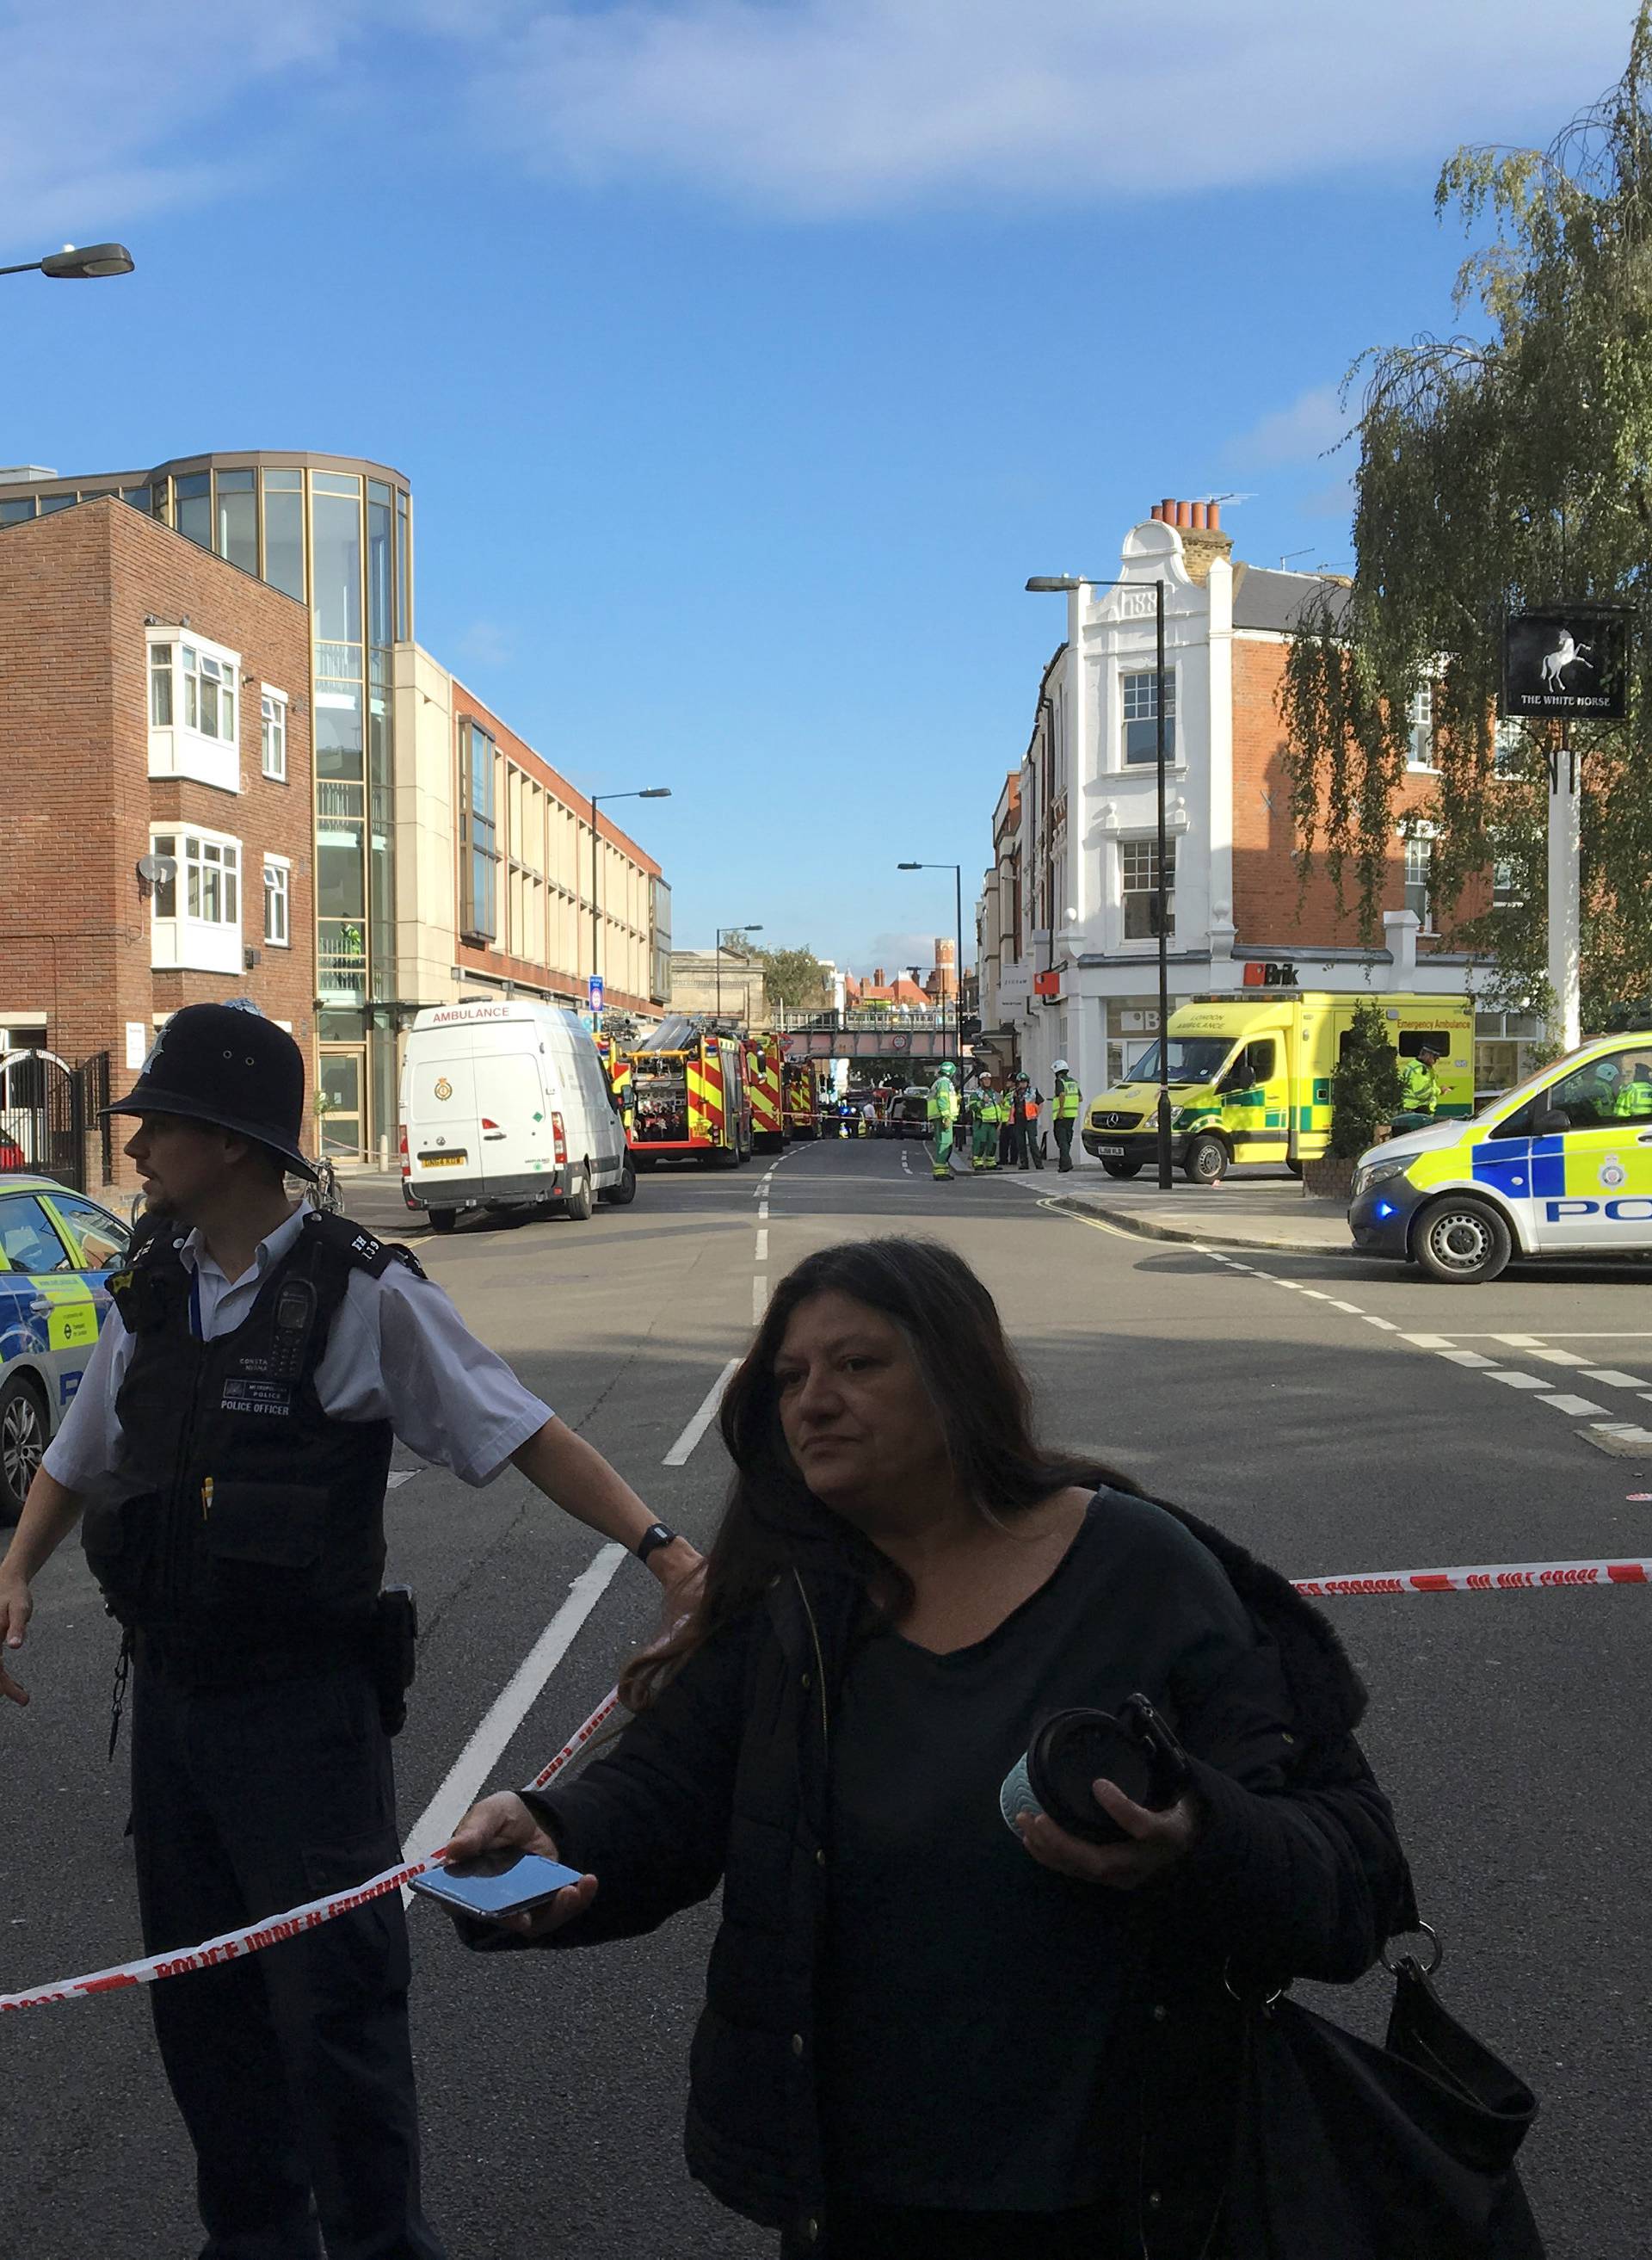 Police cordon off an area near Parsons Green station in London